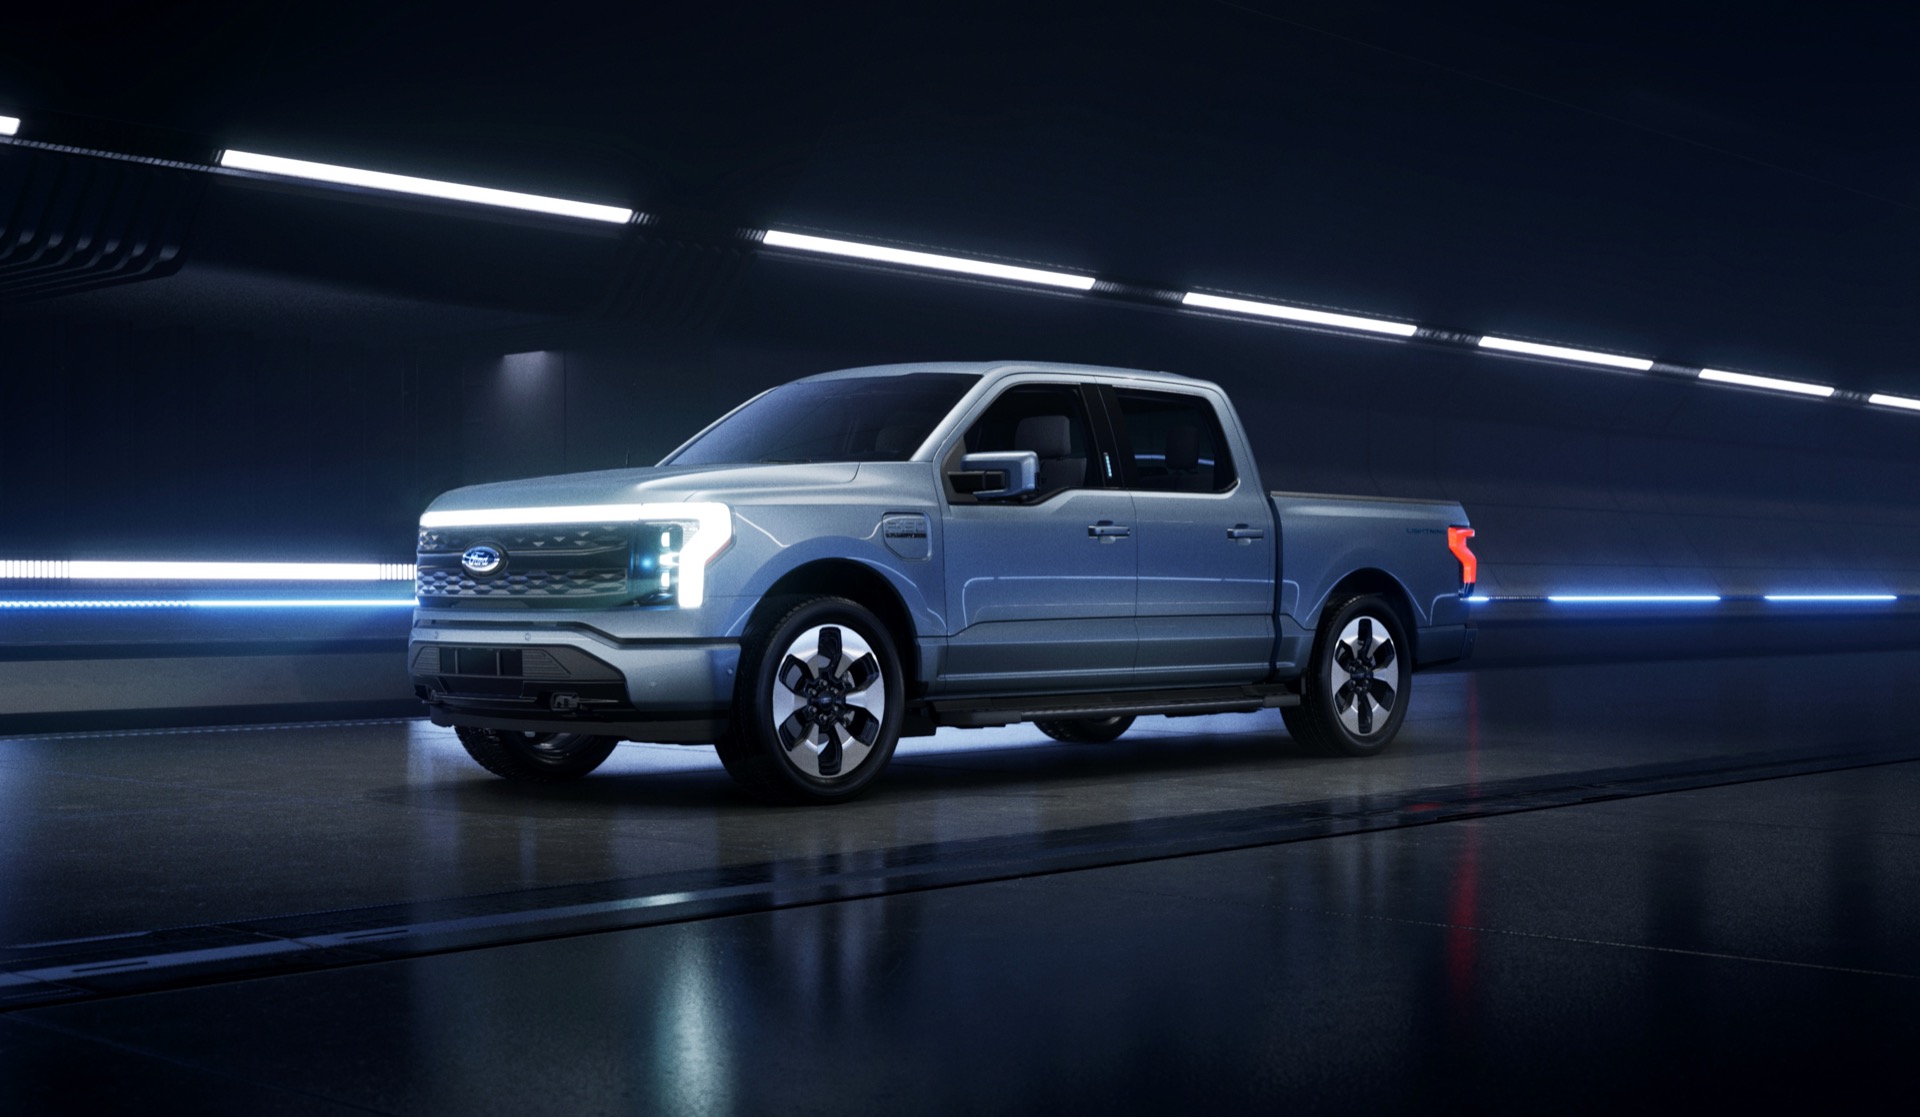 Most F-150 Lightning intenders are EV newbies, so Ford is helping them get ready with ARMost F-150 Lightning intenders are EV newbies, so Ford is helping them get ready with AR